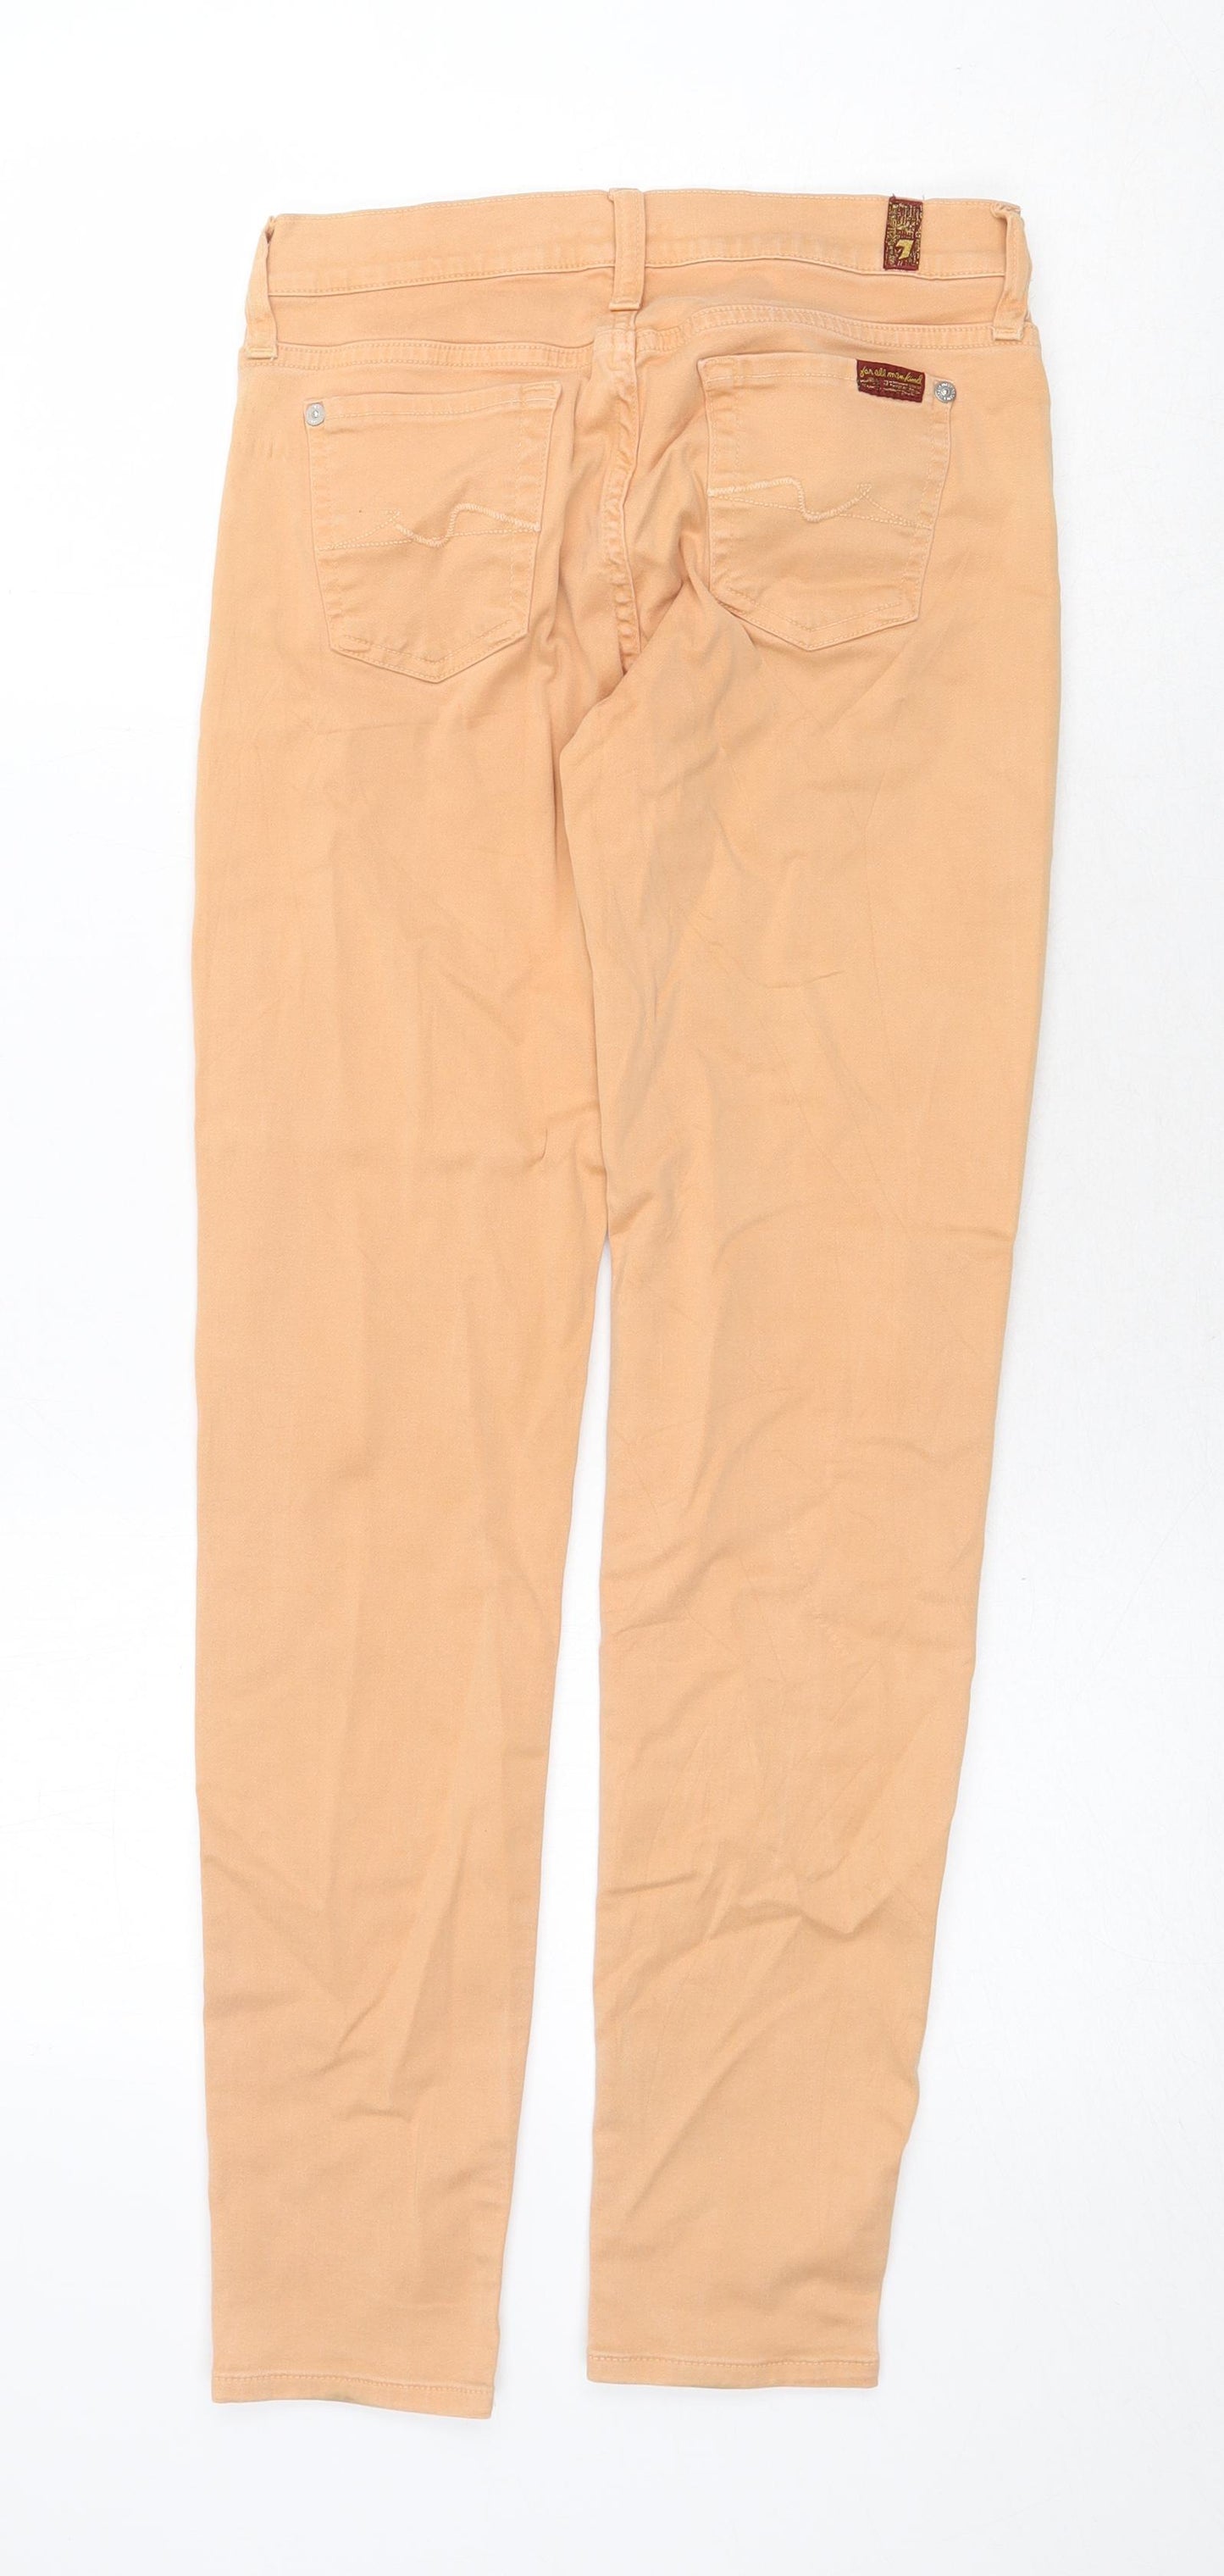 7 For All Mankind Womens Orange Cotton Skinny Jeans Size 26 in Regular Zip